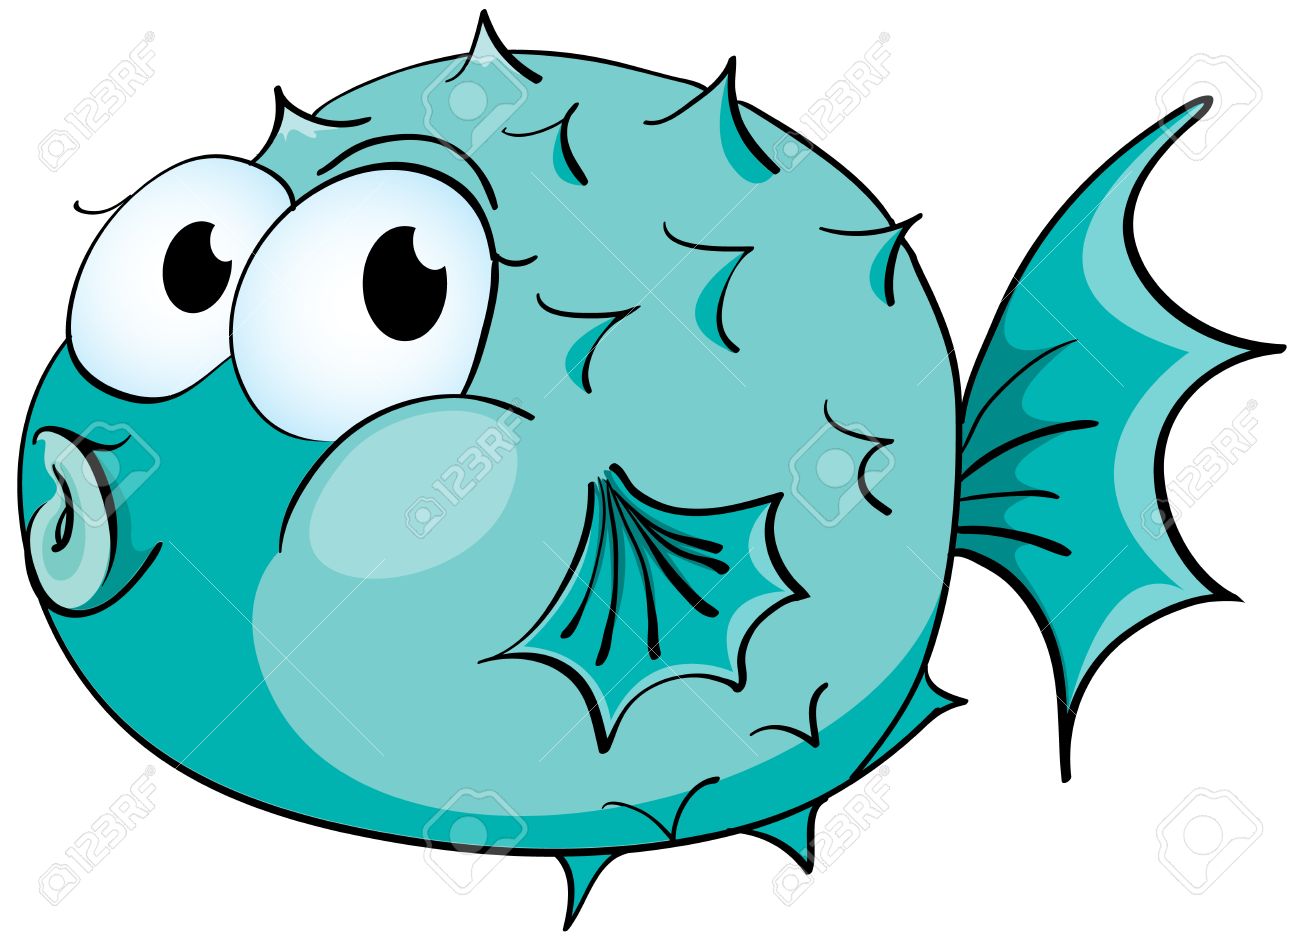 Pufferfish clipart #1, Download drawings